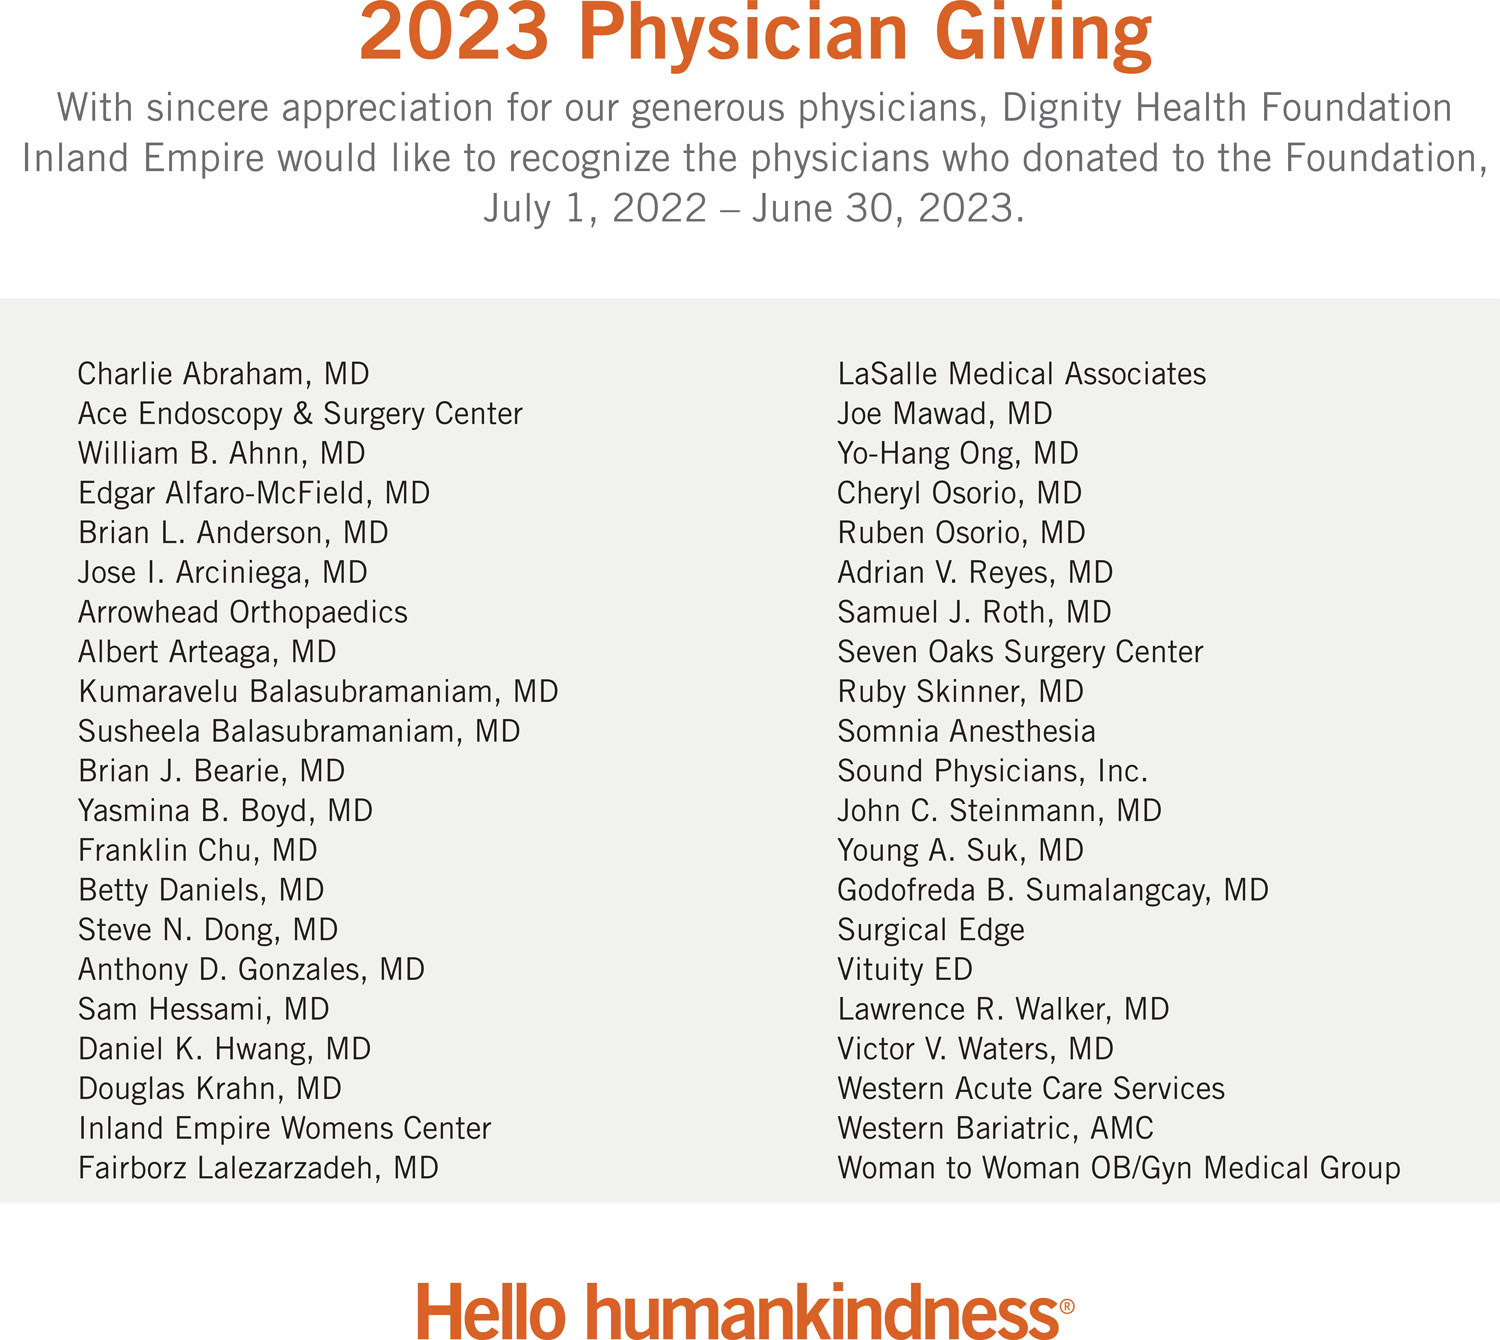 Physician Giving 2023